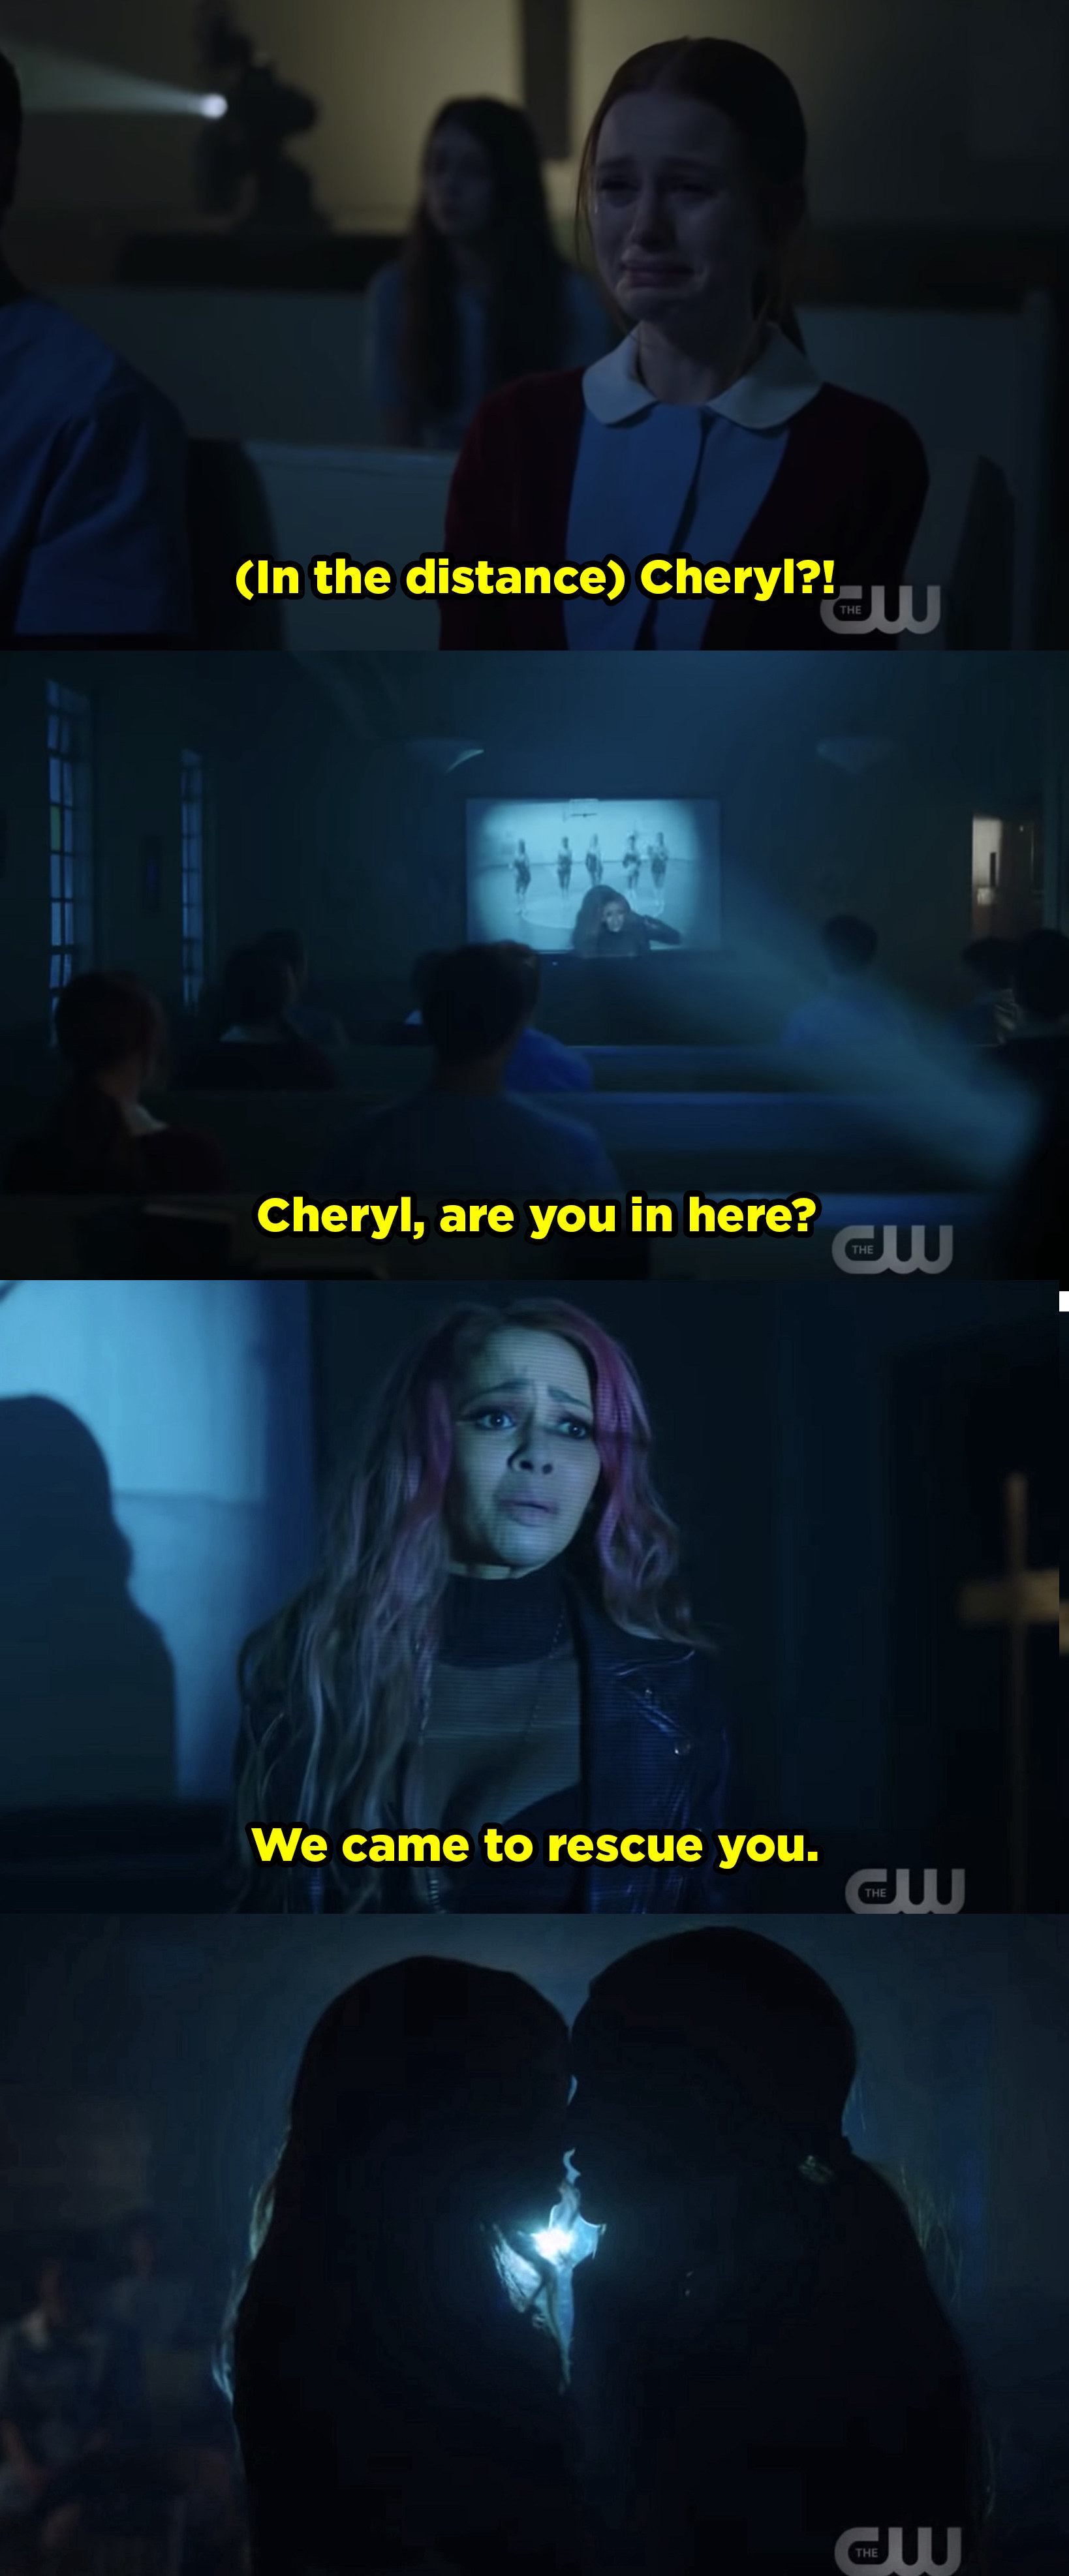 Toni telling Cheryl, &quot;We came to rescue you.&quot;